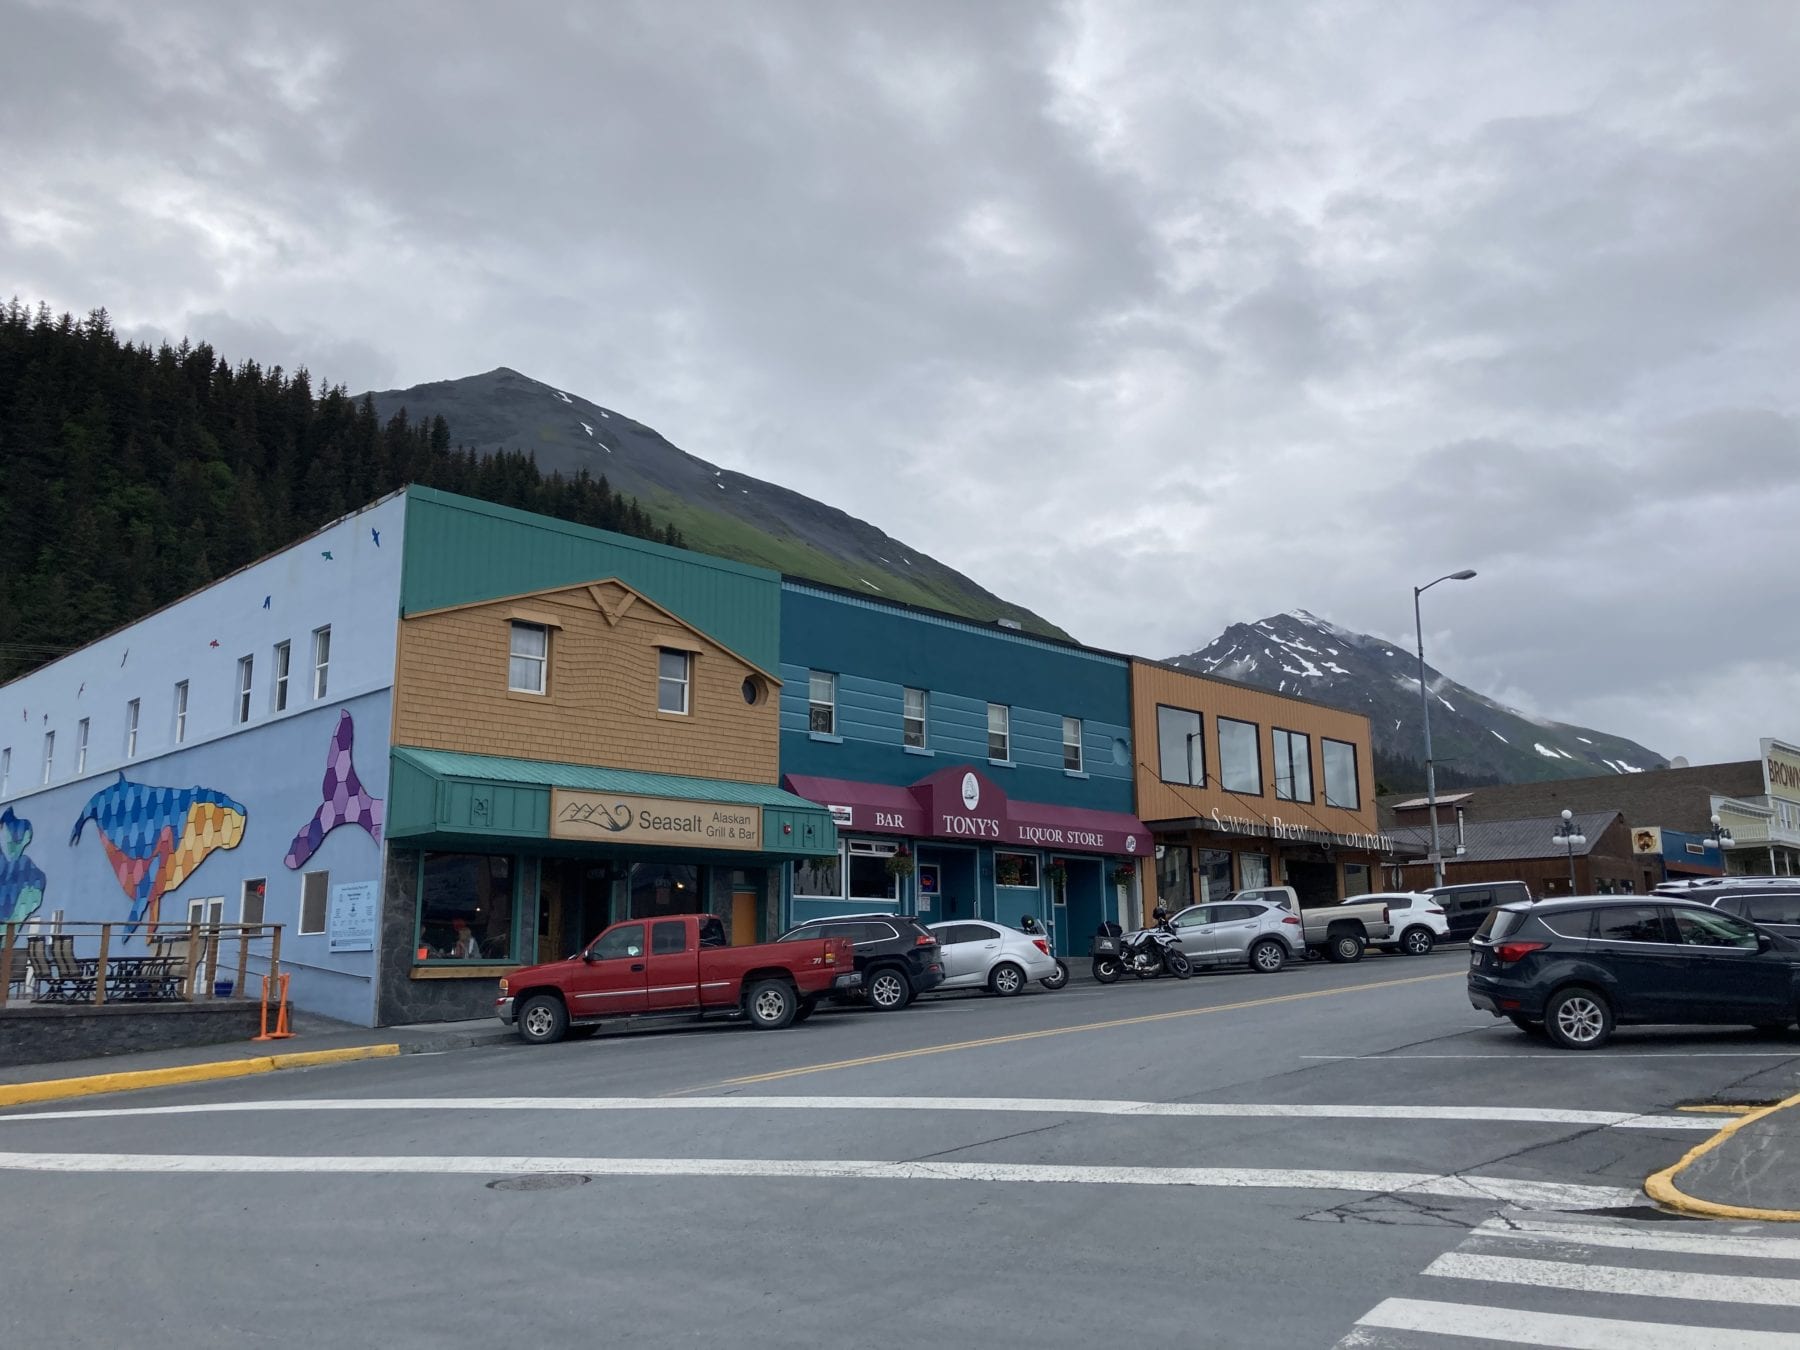 Things to do in Seward - Eating